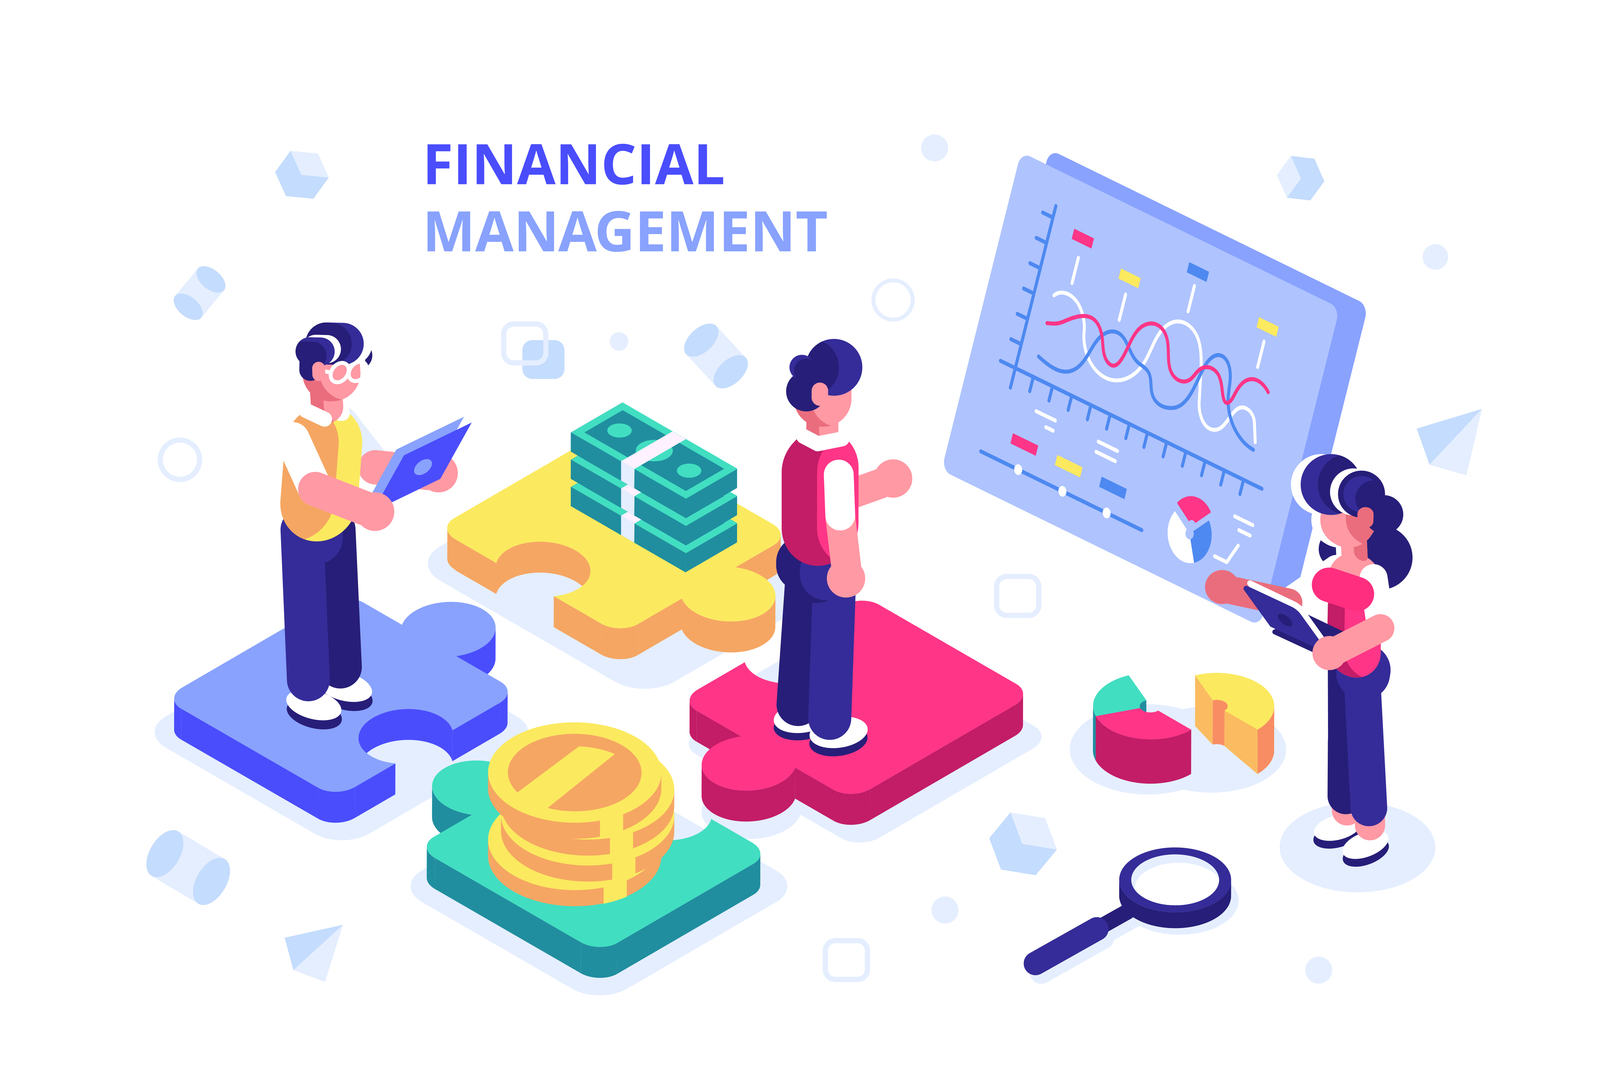 Financial management analysis banking budget business business people character chatting consulting design diagram finance flat illustration investment isometric office people team teamwork vector